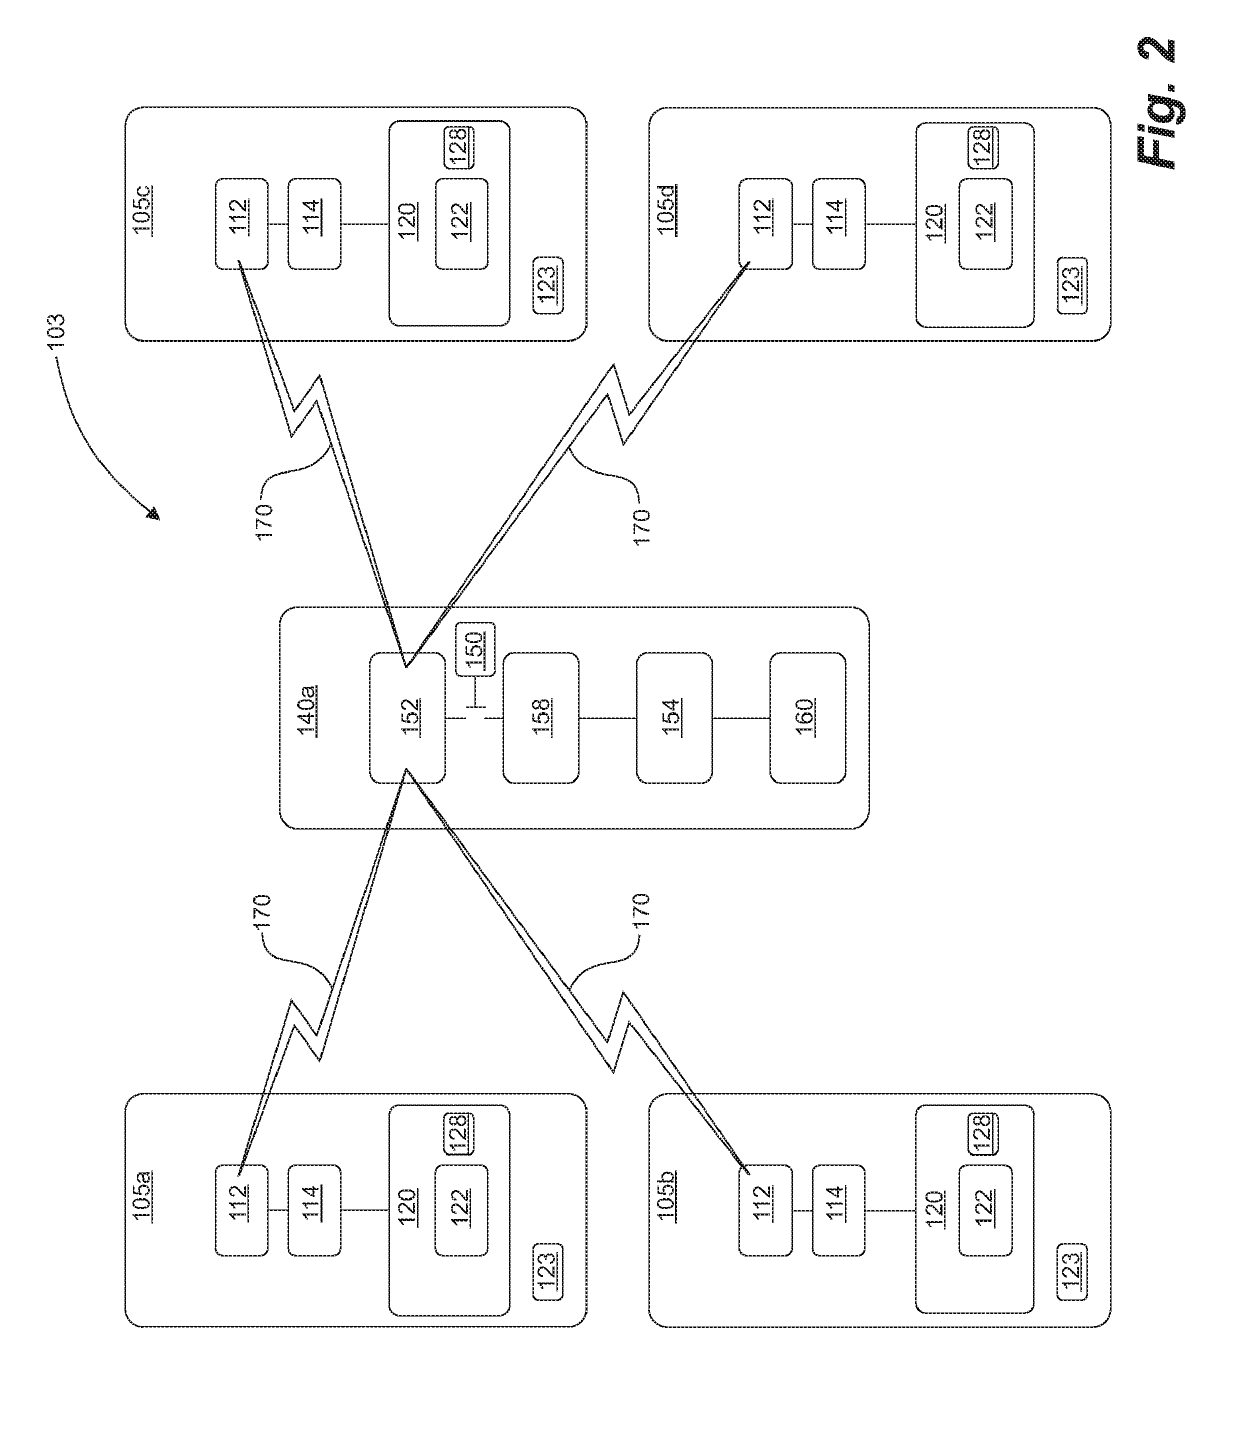 Devices, systems, and methods for securely storing and managing sensitive information